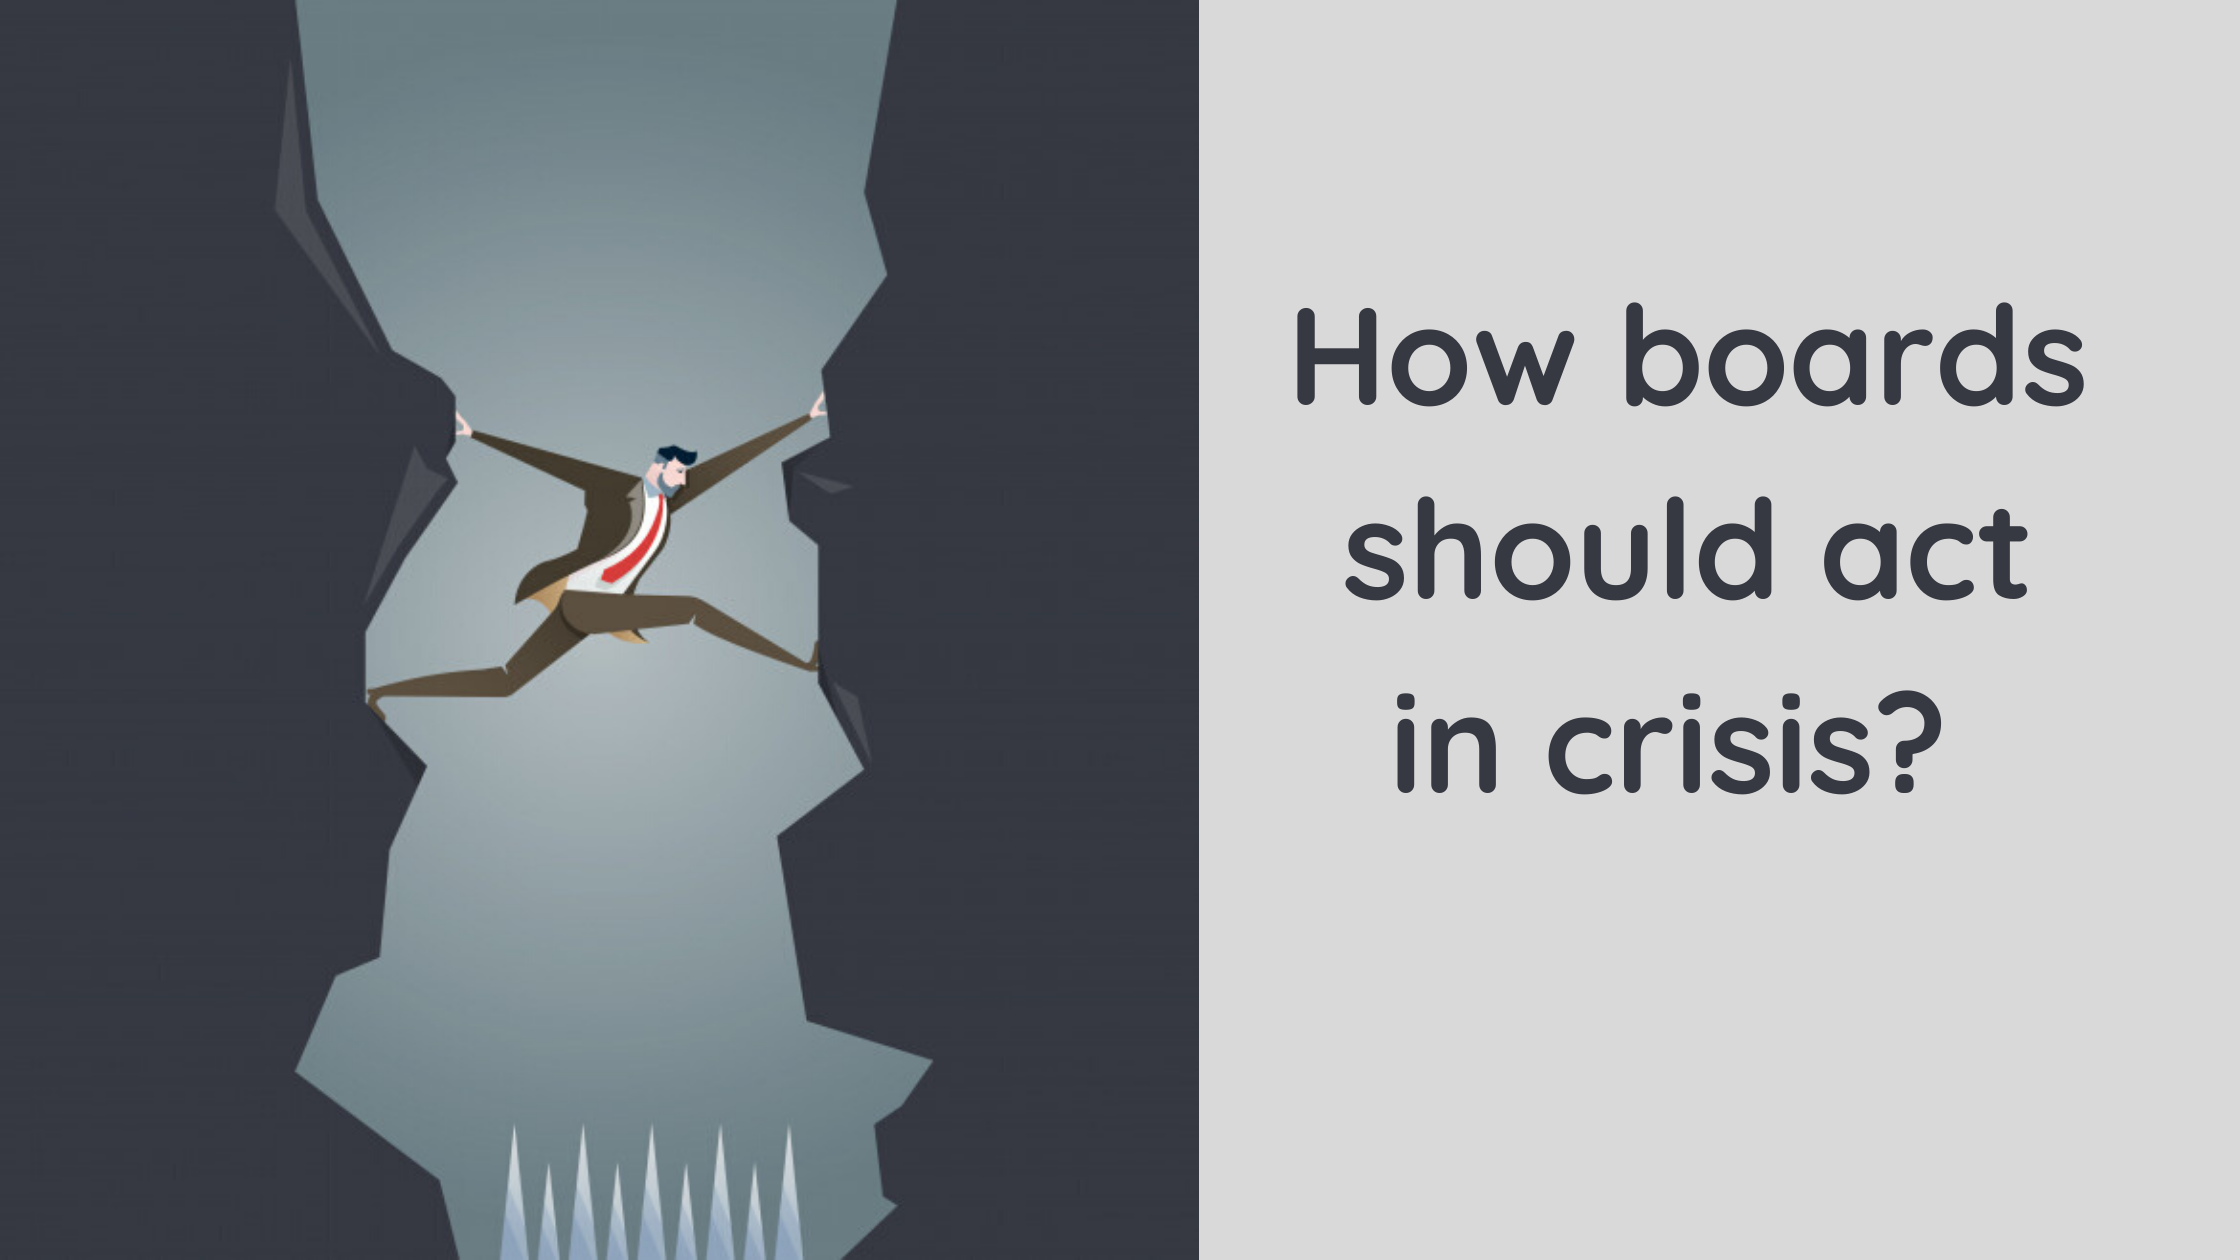 How boards should act in crisis?